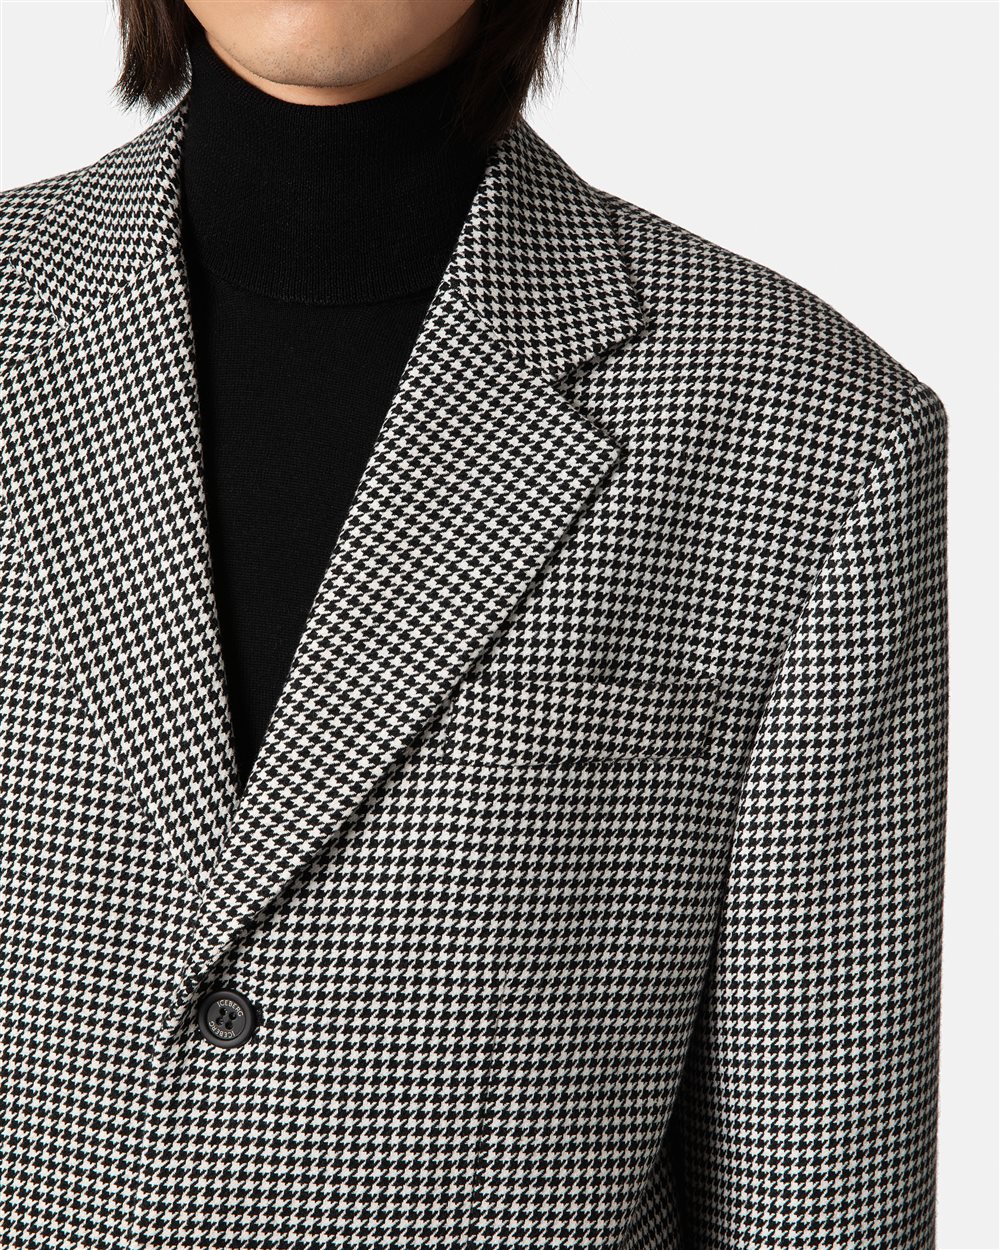 Single-breasted jacket with piede de poule pattern - Iceberg - Official Website